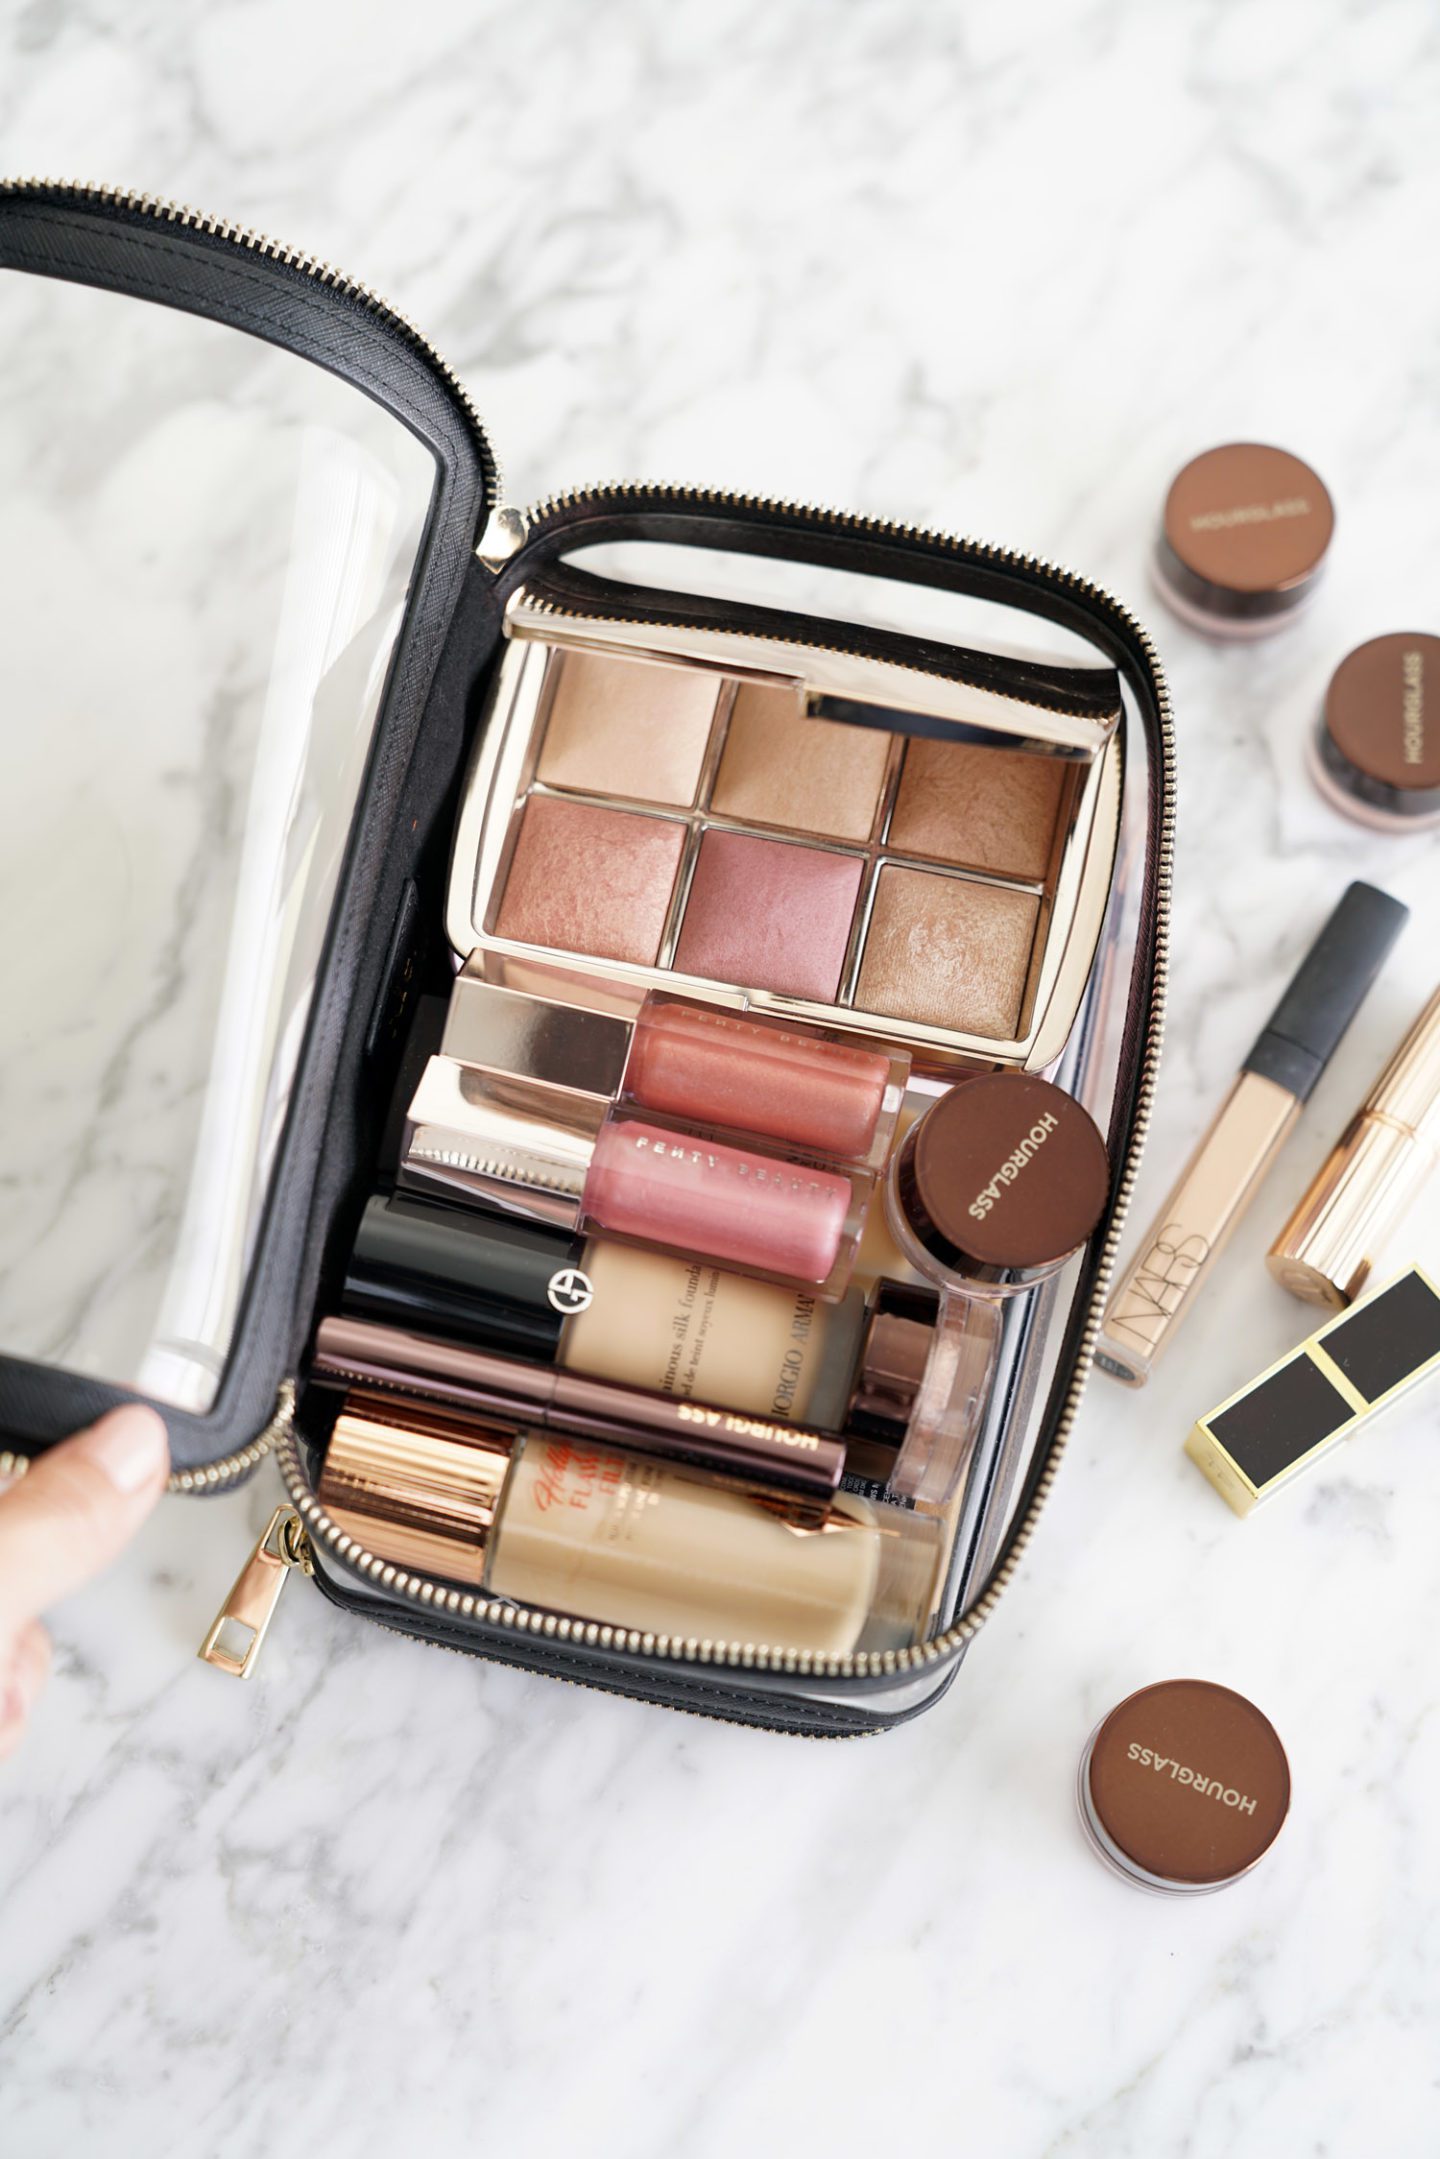 Travel Beauty - The Daily Edited Transparent Cosmetic Case, The Beauty Look Book